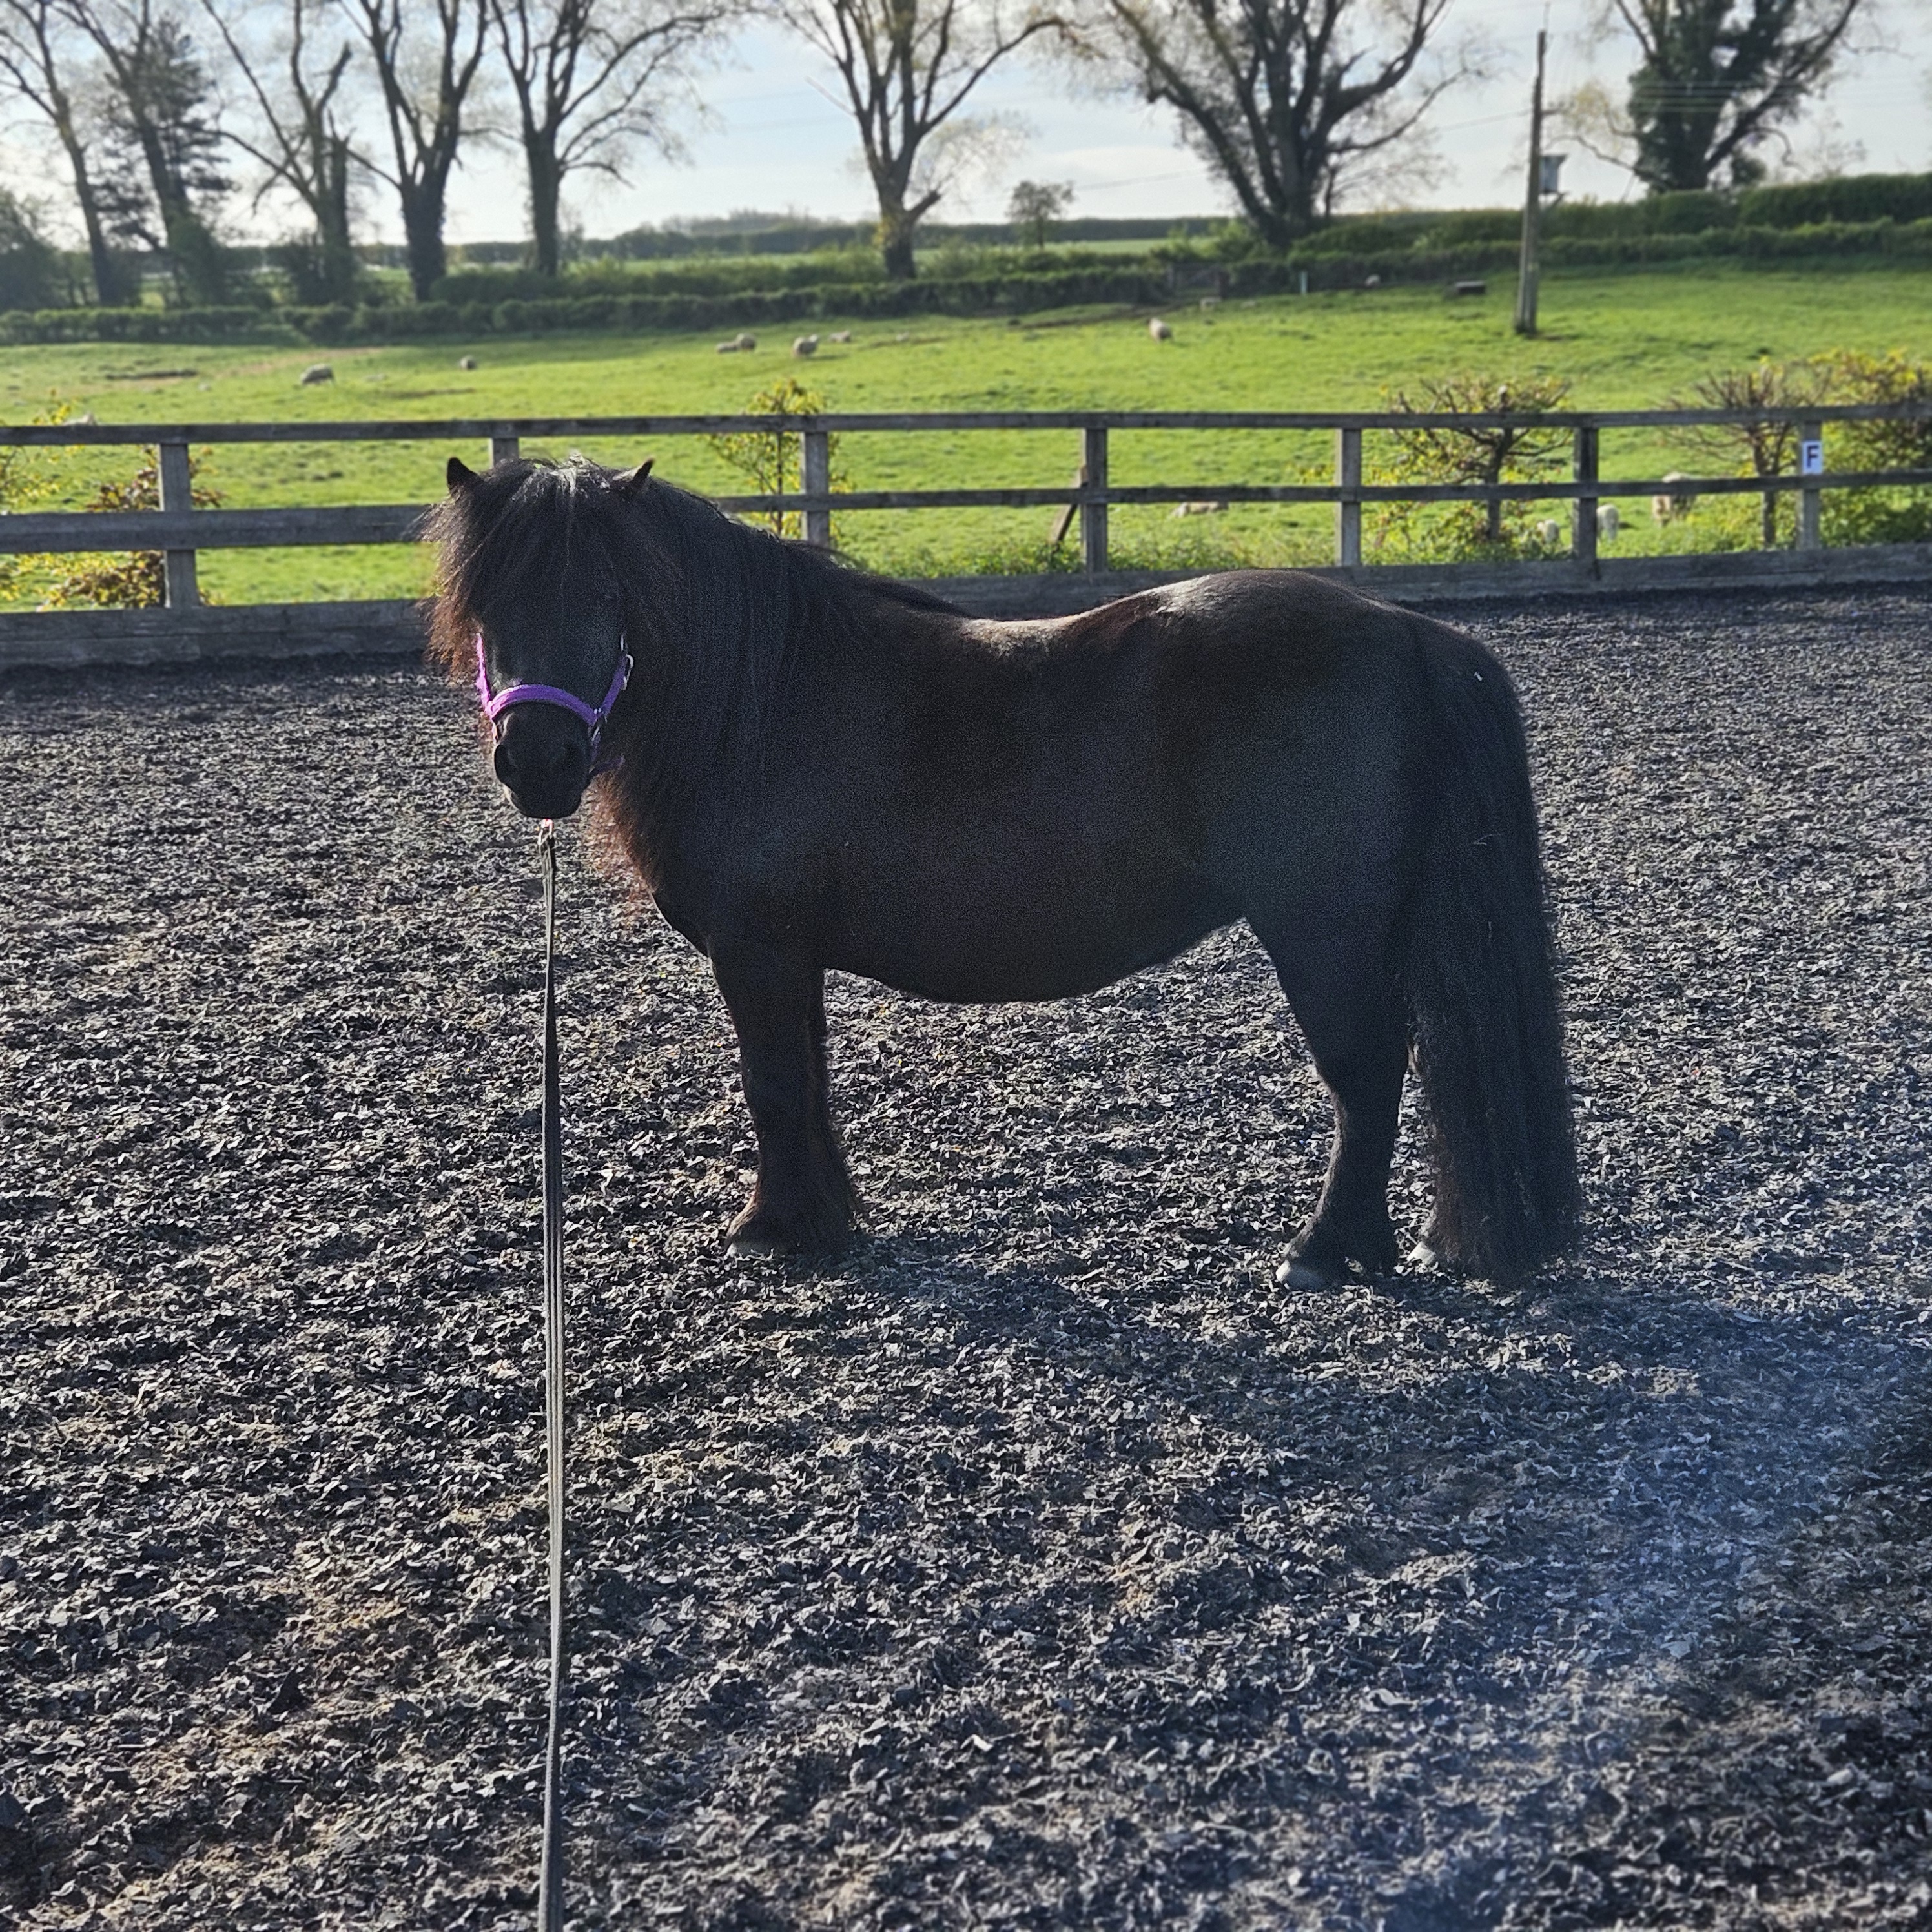 The Not-So-Secret Diary of Diva the Shetland Pony - This Time It’s Tricks! (part 1)